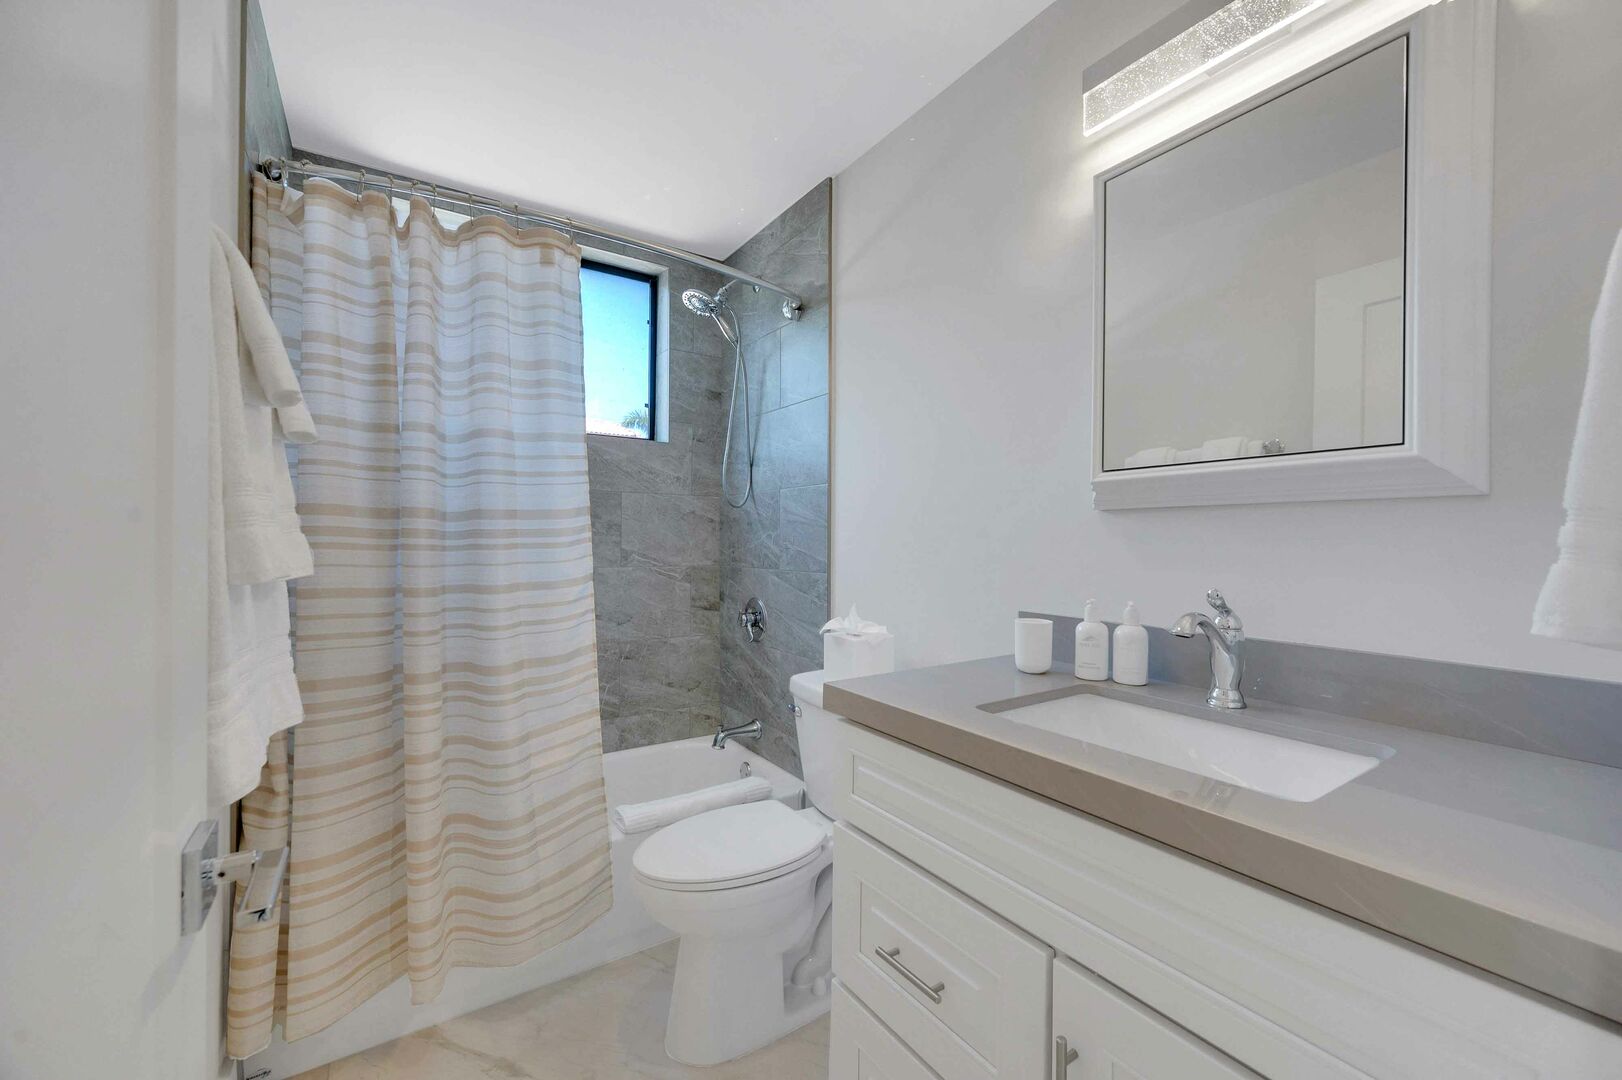 The full bathroom is nicely located between bedroom three and four, featuring a shower tub combo.